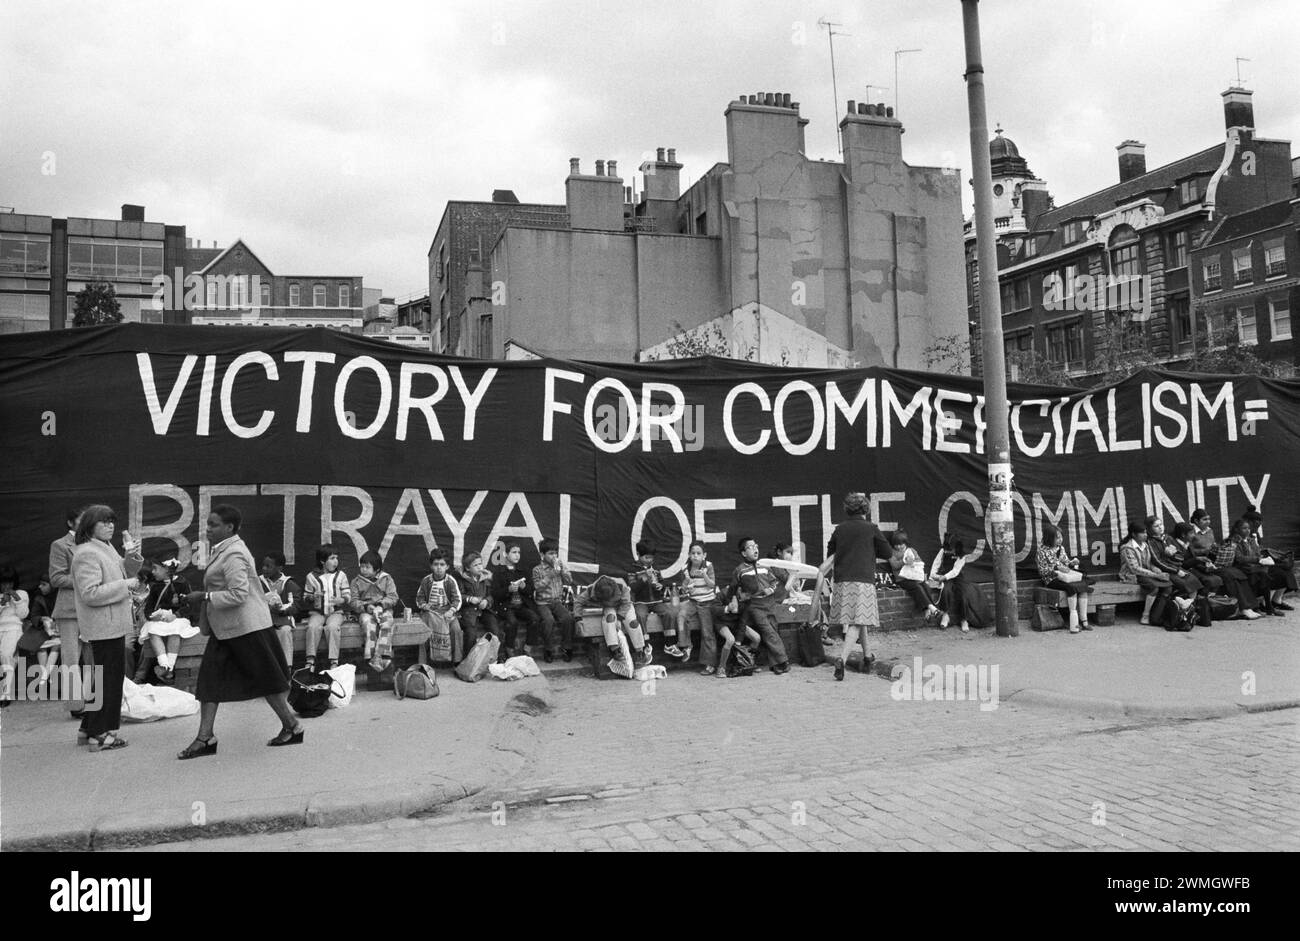 London 1980s. Opening of the new Covent Garden Piazza. The Covent Garden Community Association (CGCA) fought against the commercialism of this central part of London. Their banner, ‘Victory for Commercialism Betrayal of the Community’.  Covent Garden Piazza was opened by Sir Horace Cutler on 19th June 1980. UK HOMER SYKES Stock Photo